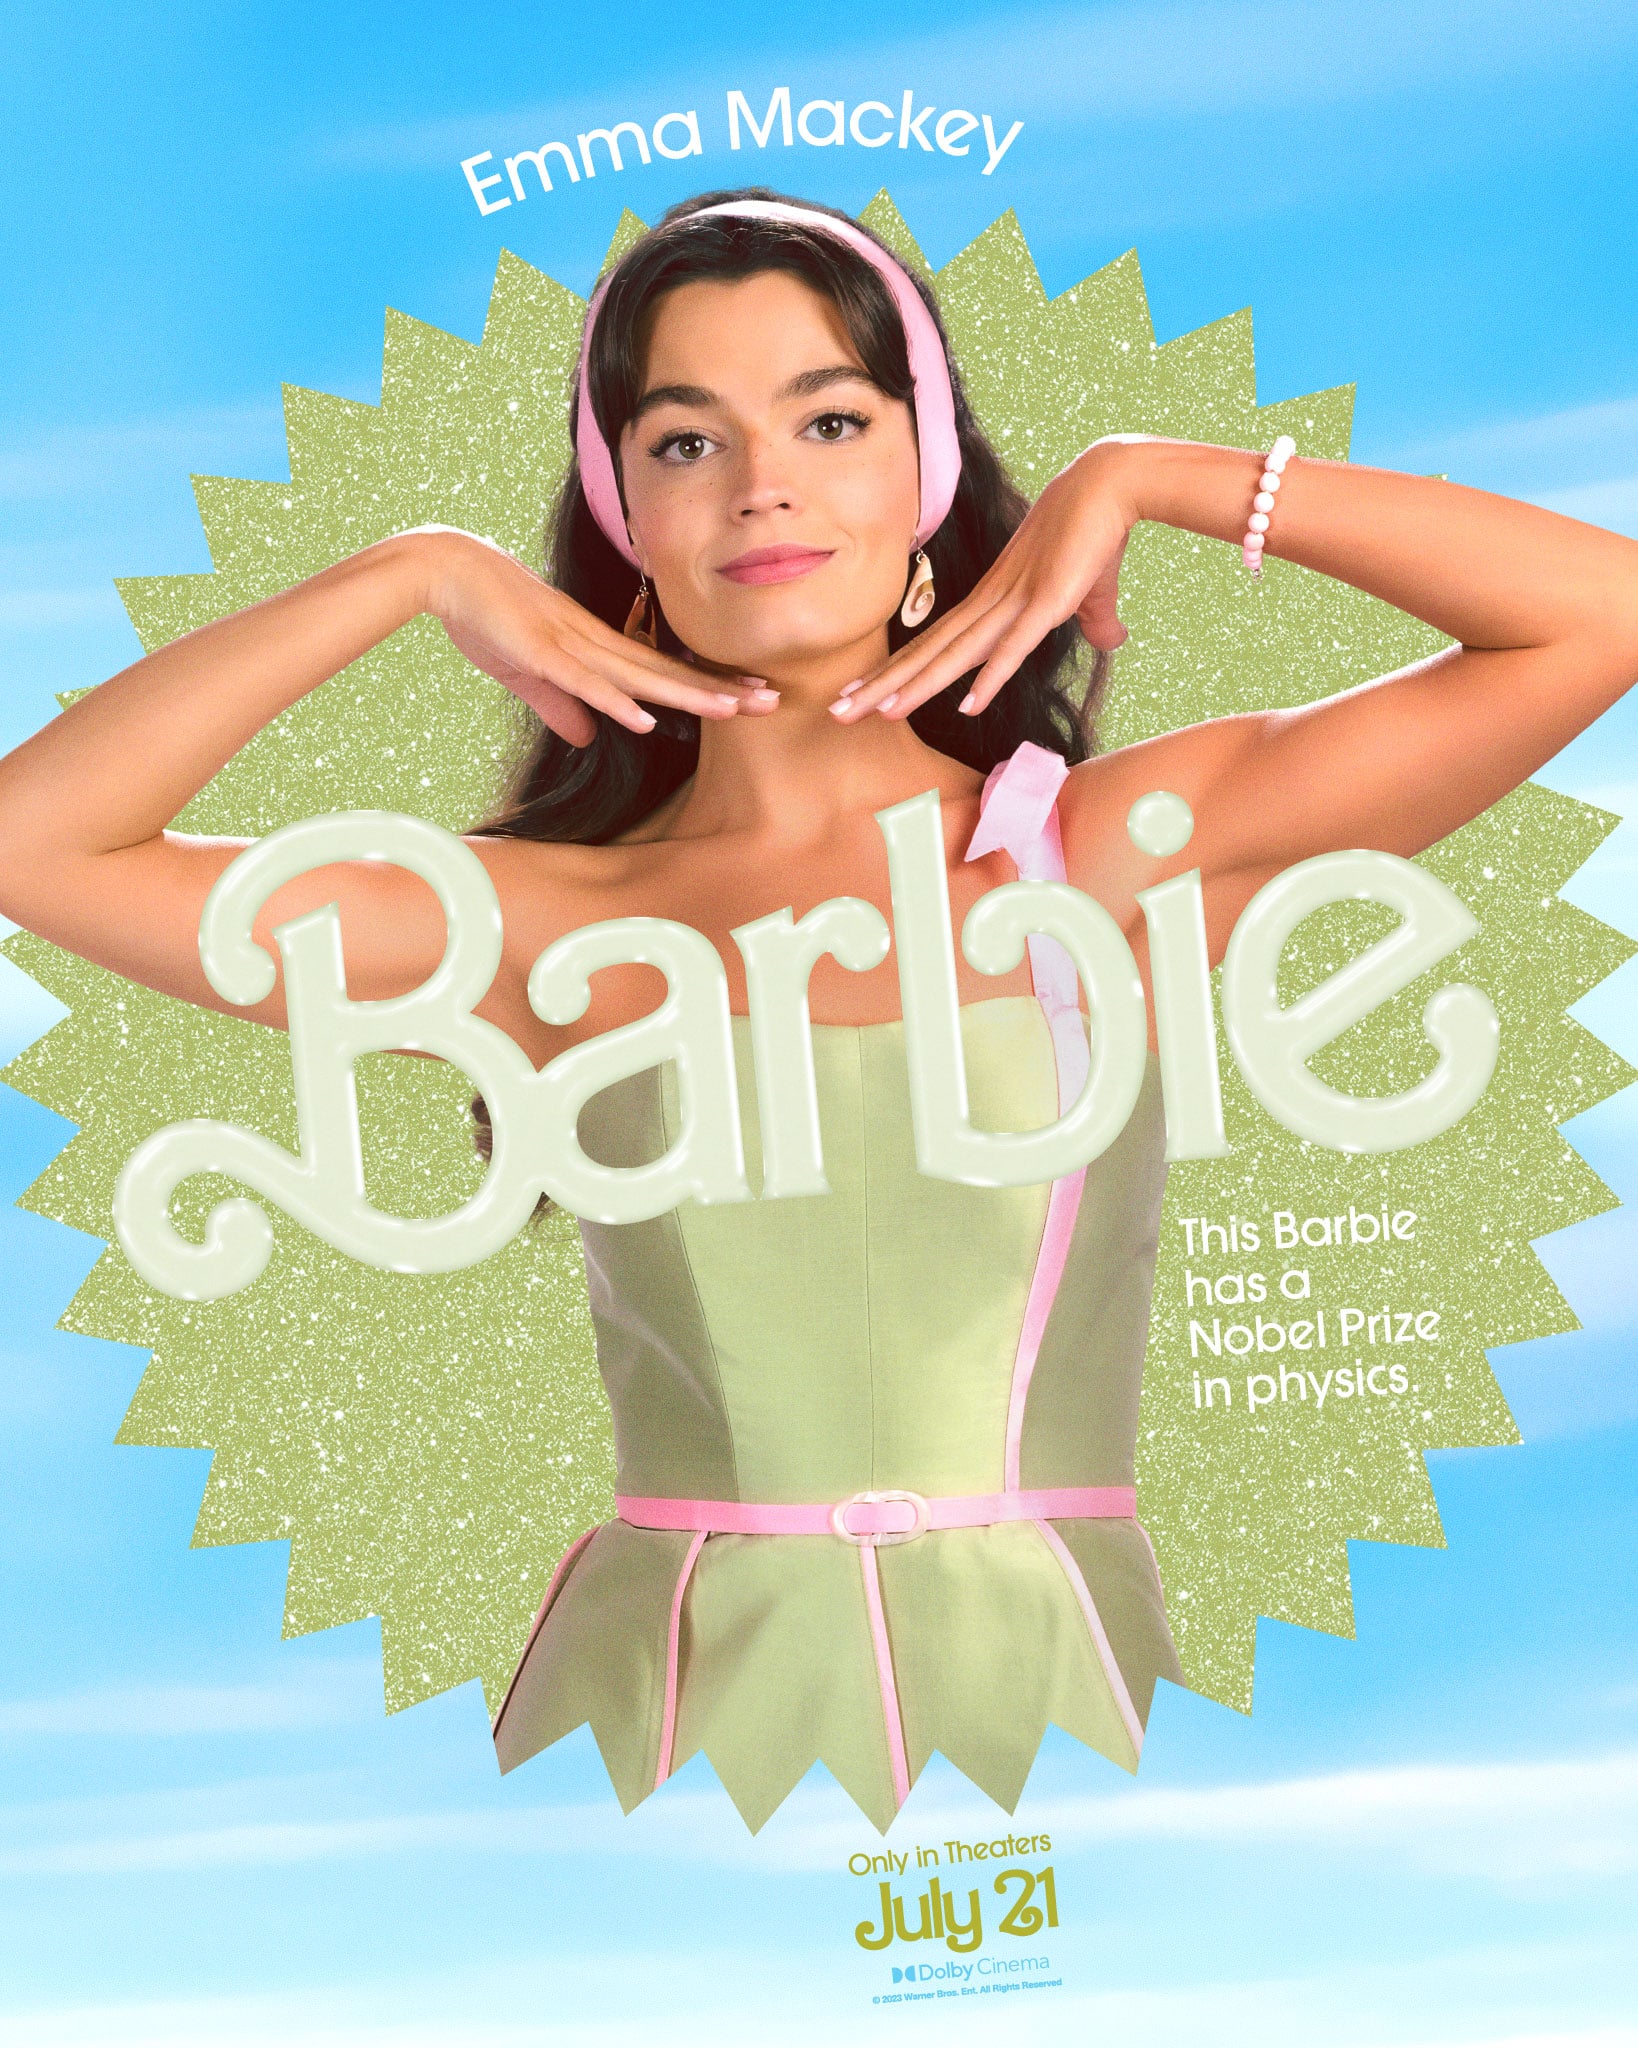 Barbie' Is About as Good as a Barbie Movie Could Ever Be